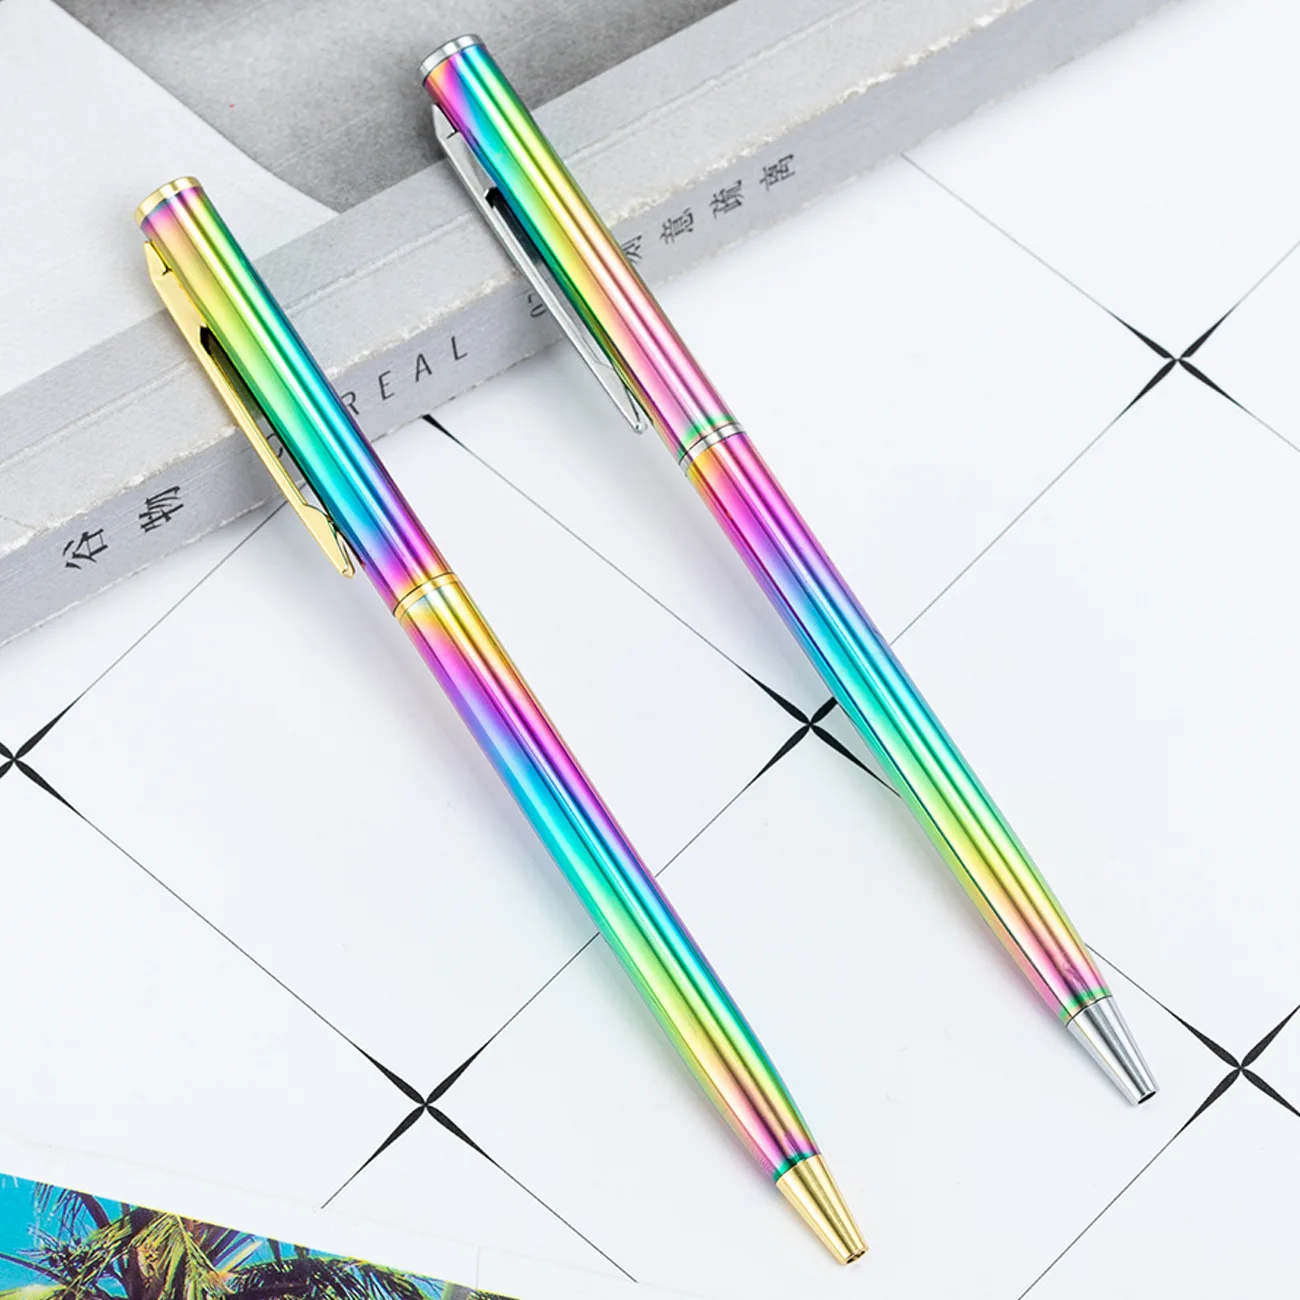 20Pcs Gradient Metal Ballpoint pen Cute Rotary Ball pens Business pen office School writing supplies children students multi color 10 in 1 candy color ball ballpoint pen cute marker pen school supplies